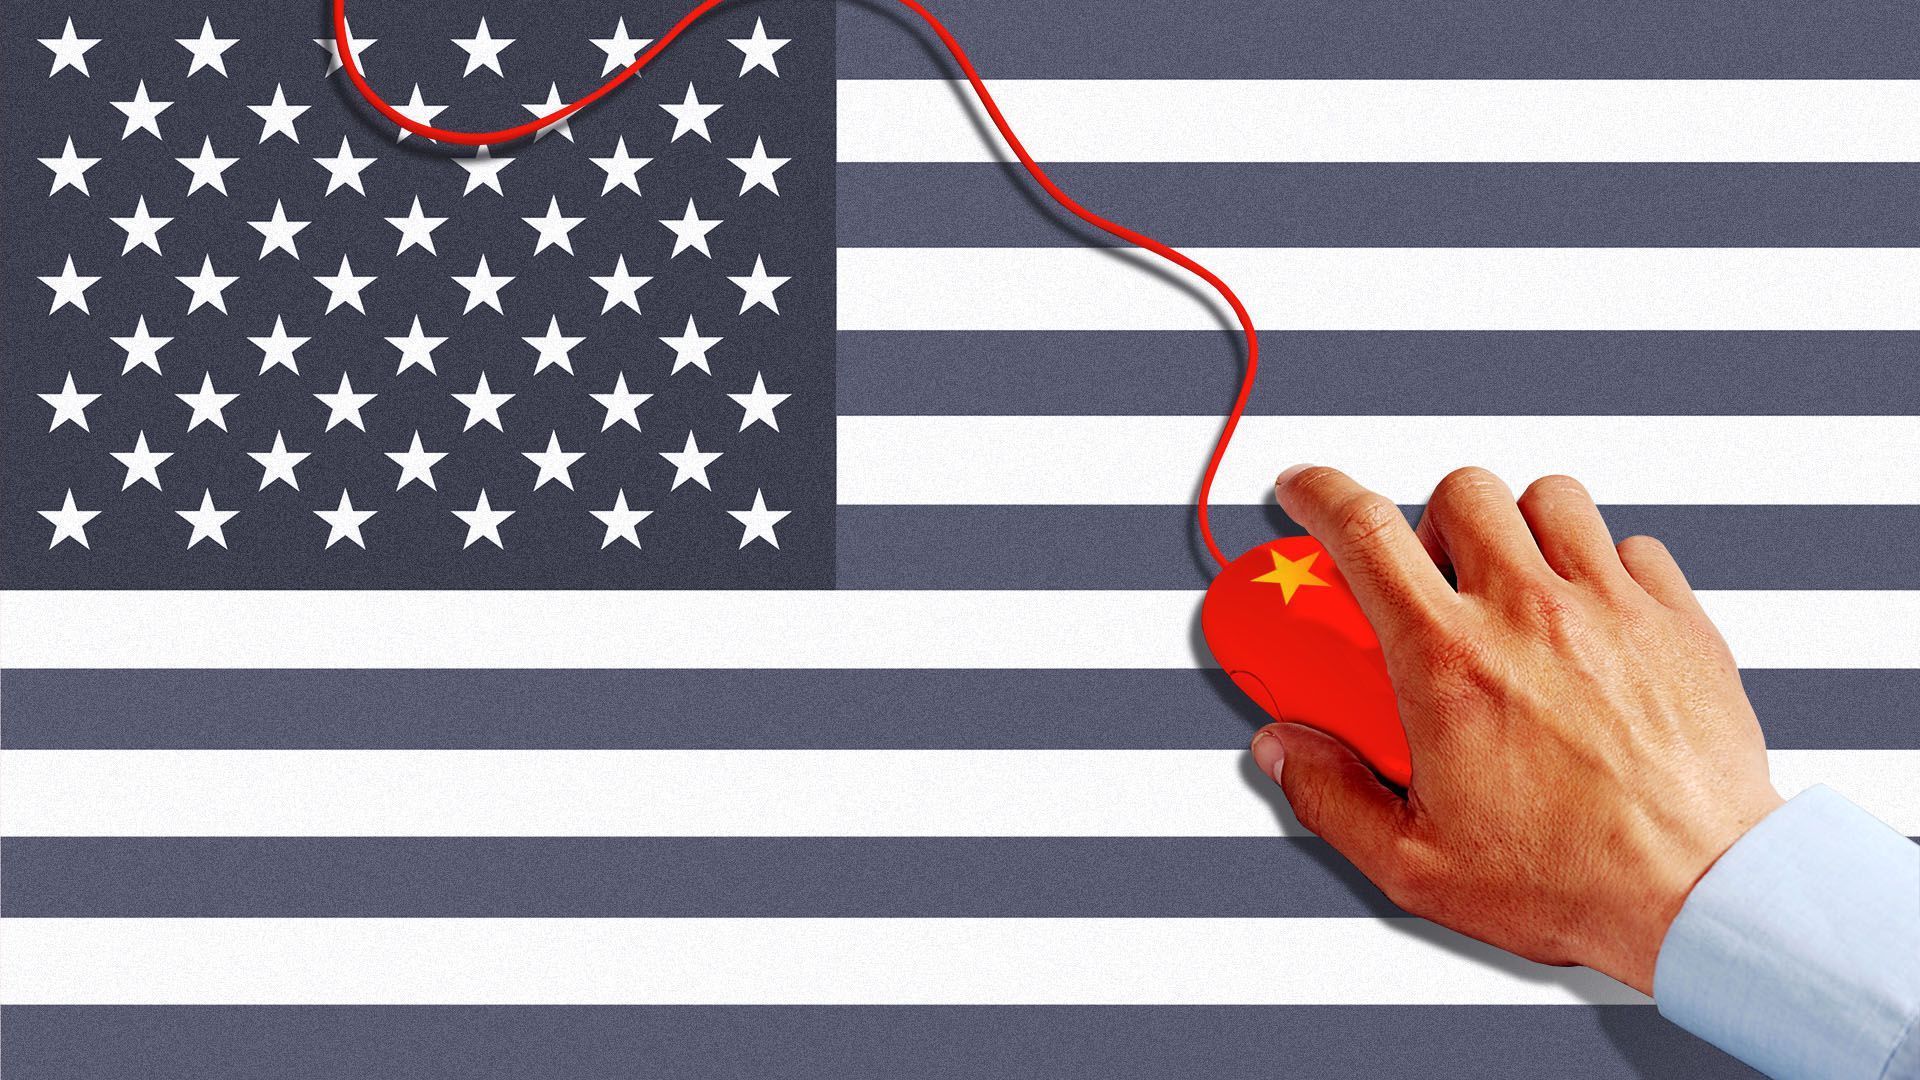 Mouse with the Chinese flag over the American flag